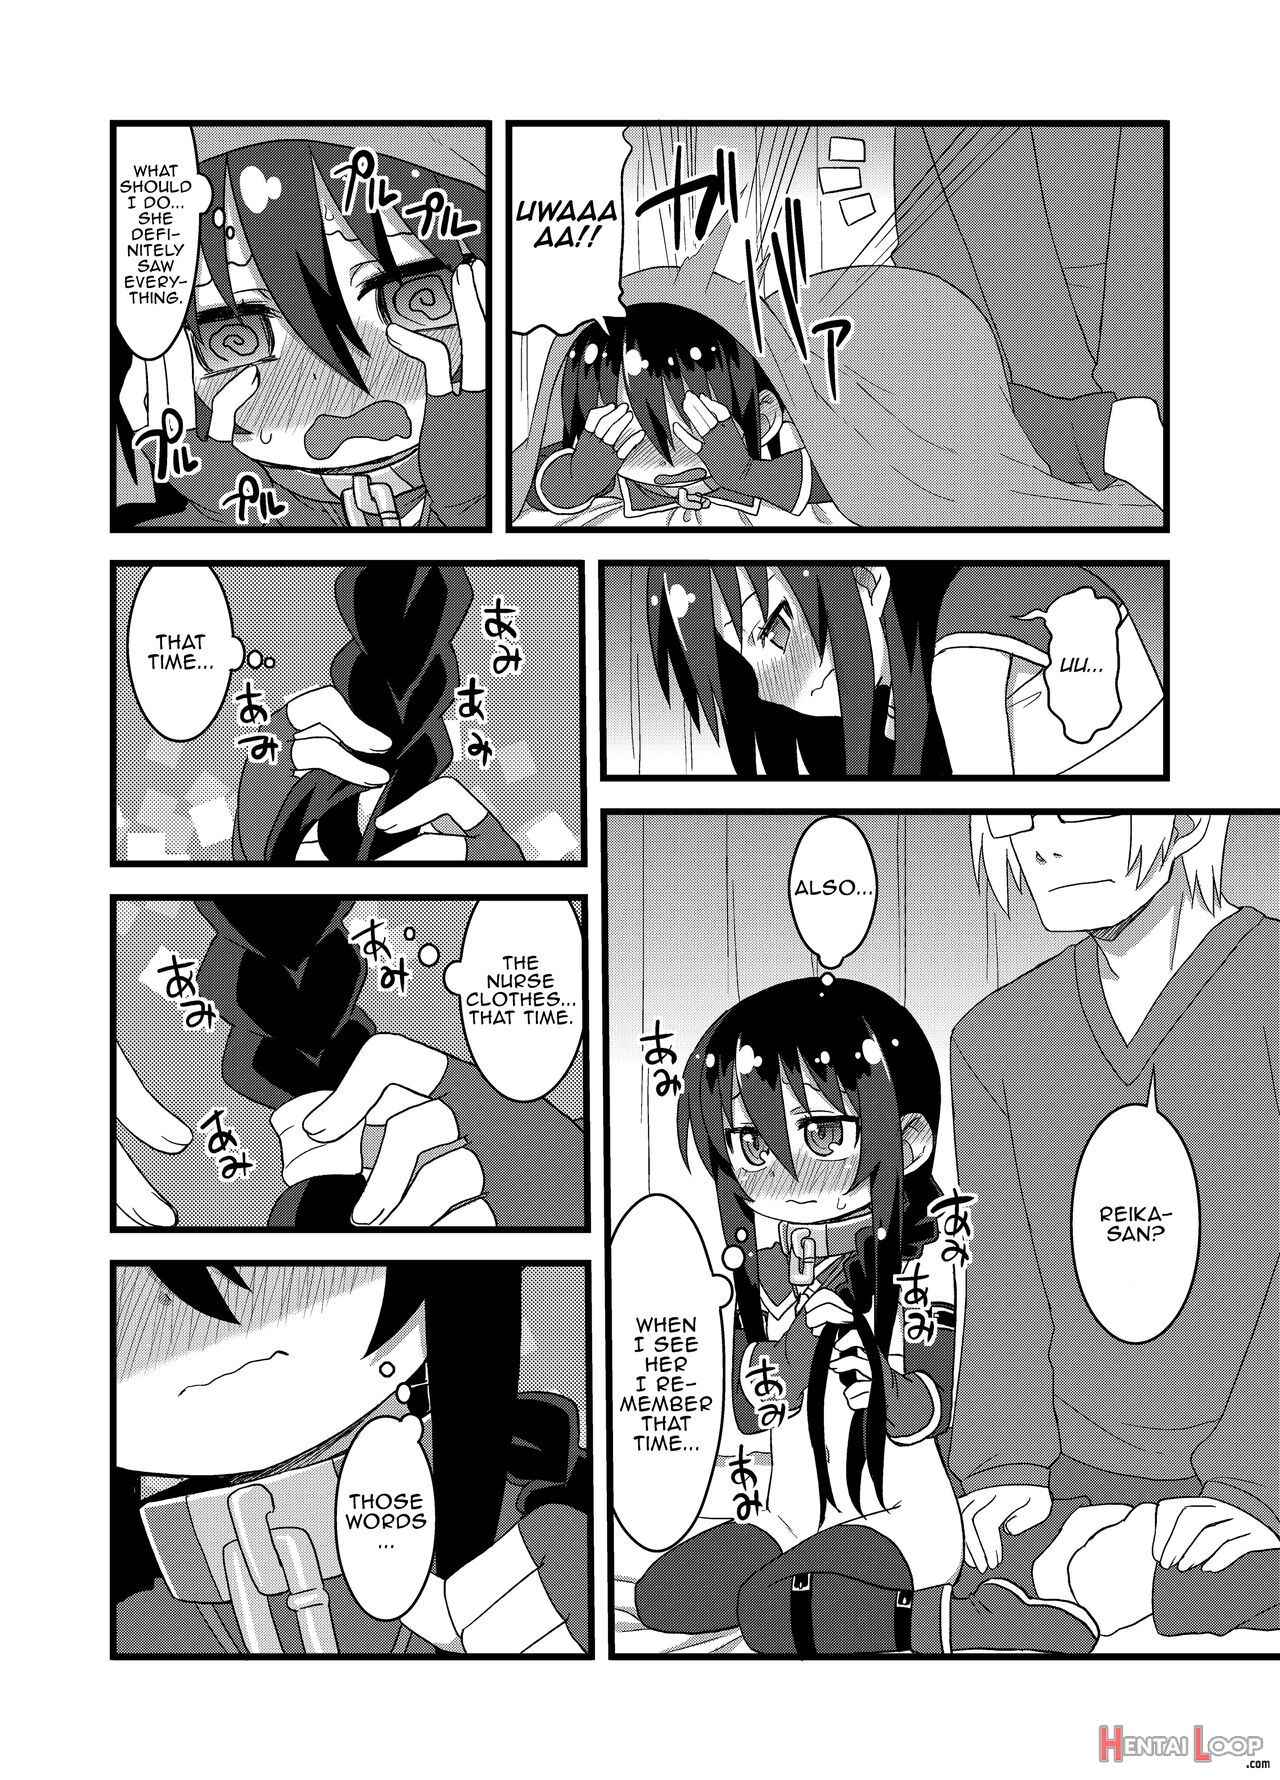 Even More With Reika-chan!! page 78